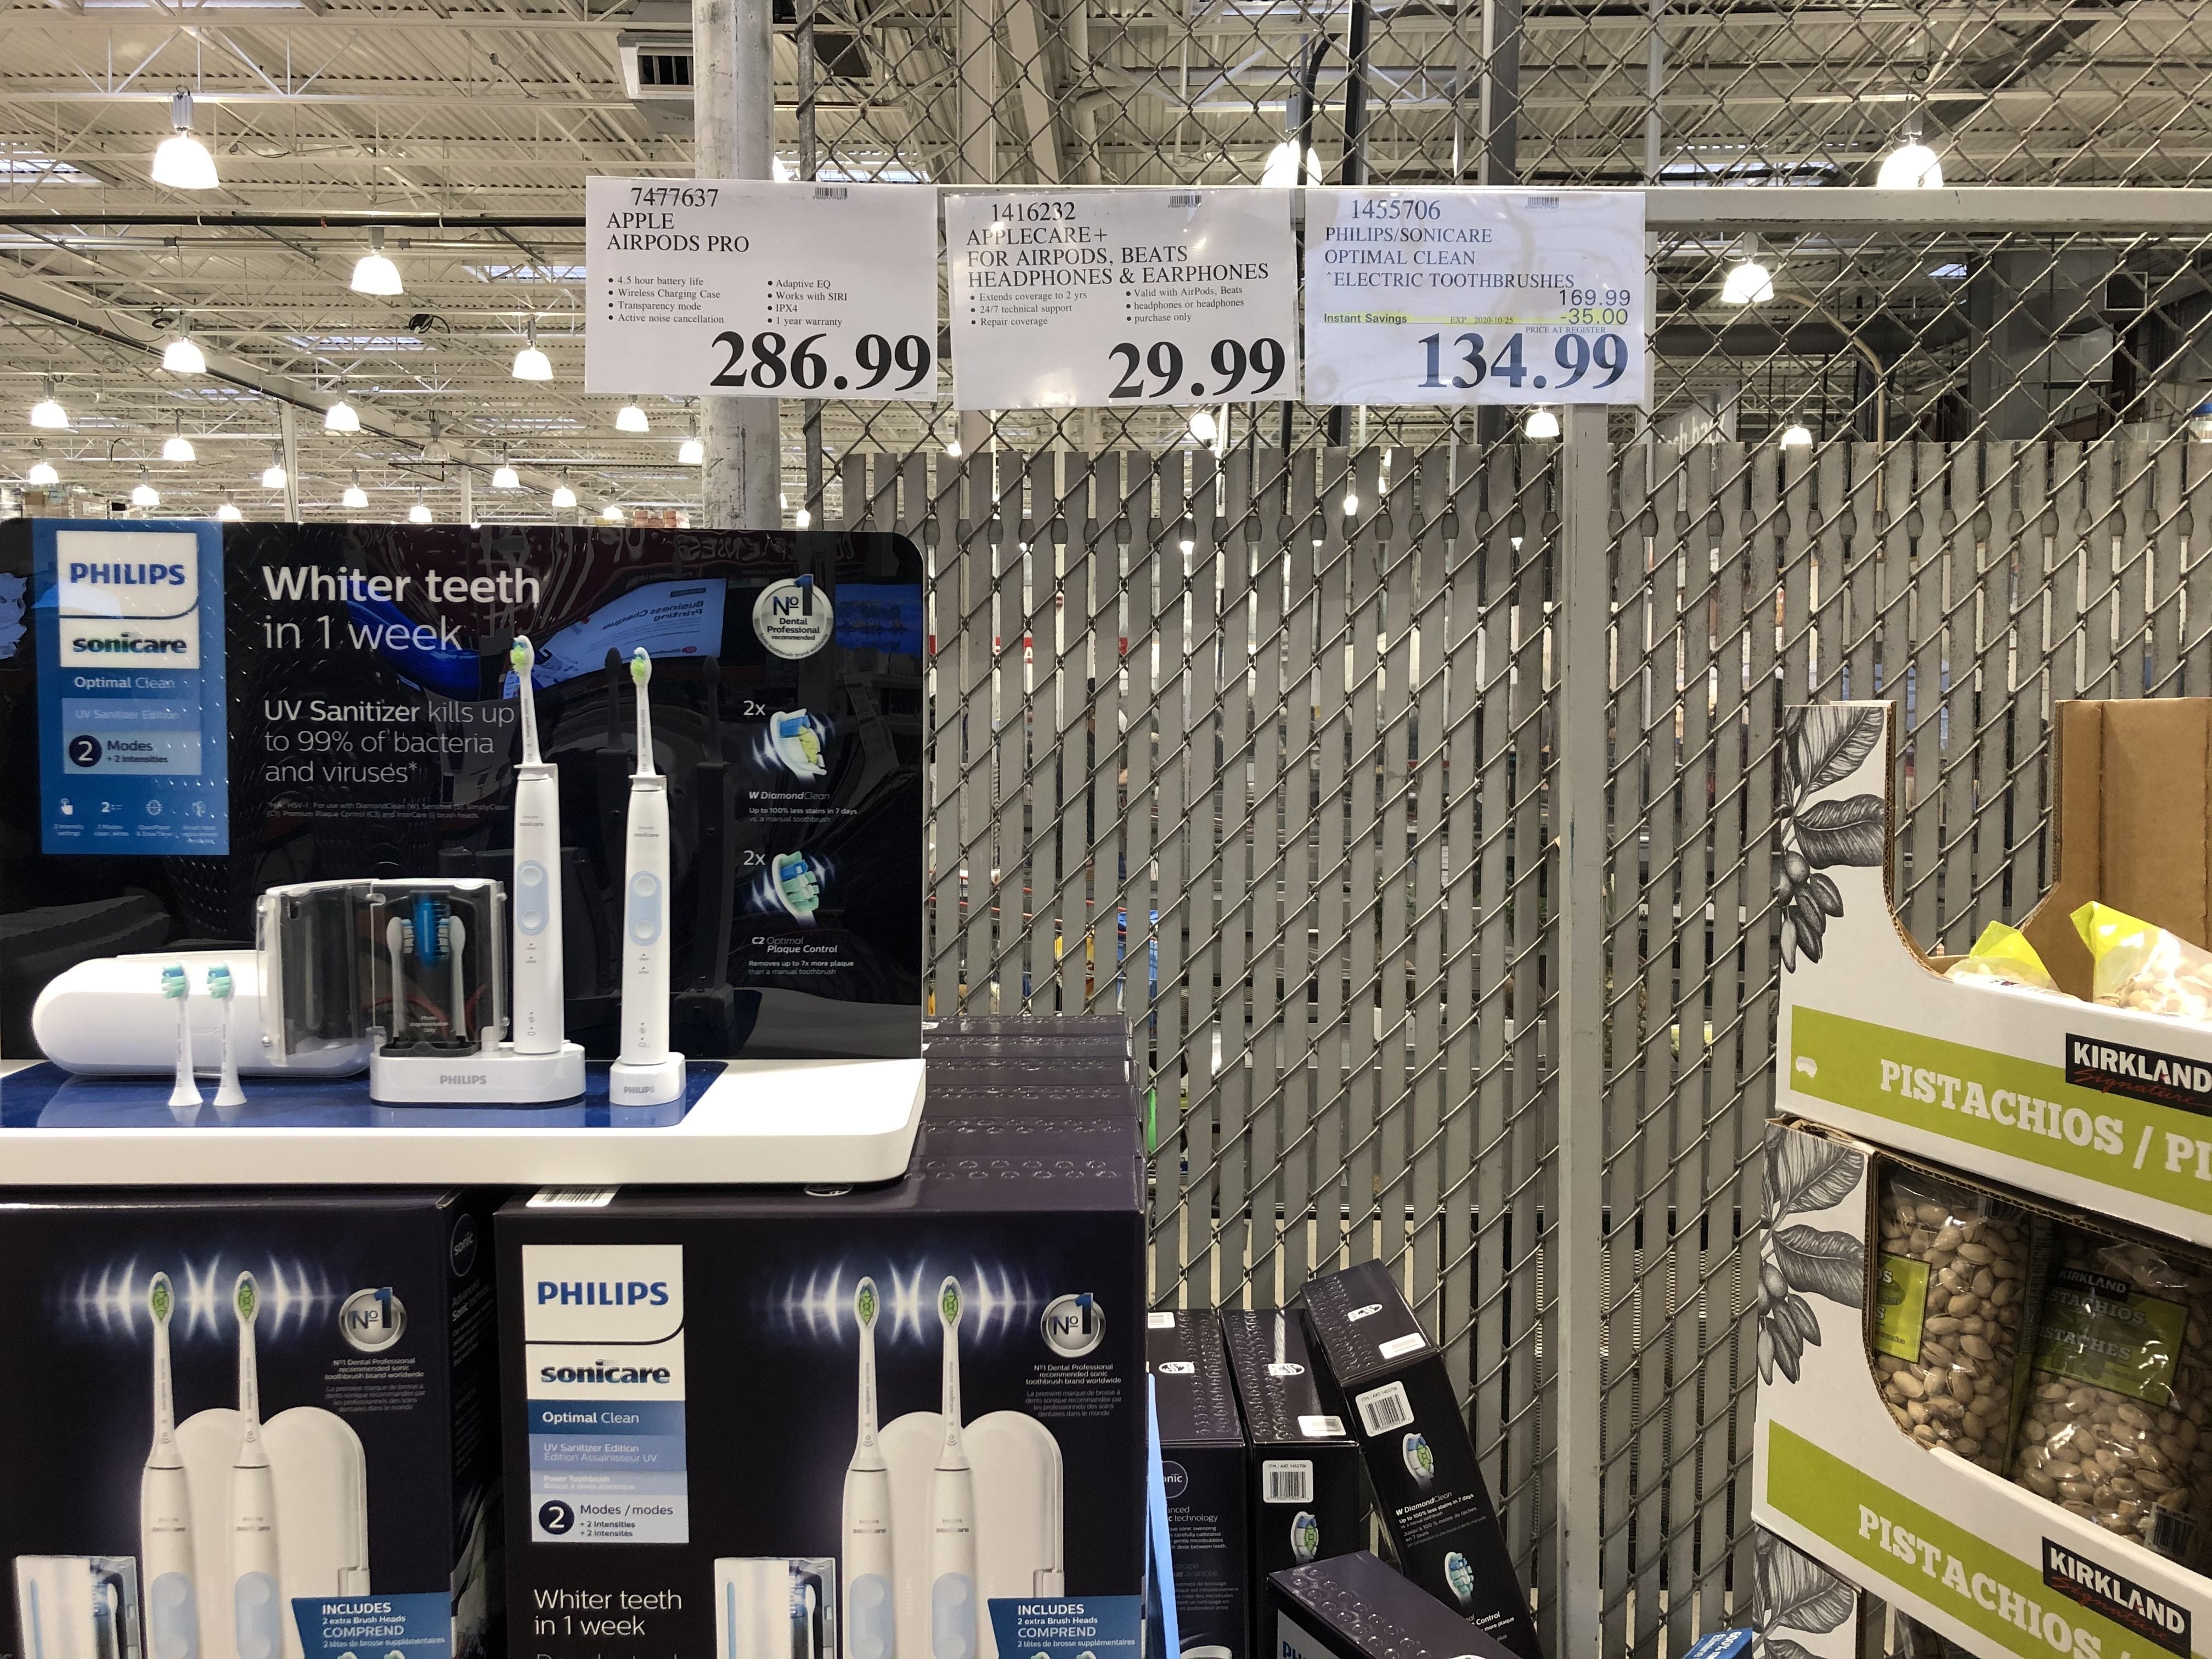 Costco] $135 Philips Sonicare Optimal Clean Rechargeable Electric Toothbrush,  2-pack - RedFlagDeals.com Forums